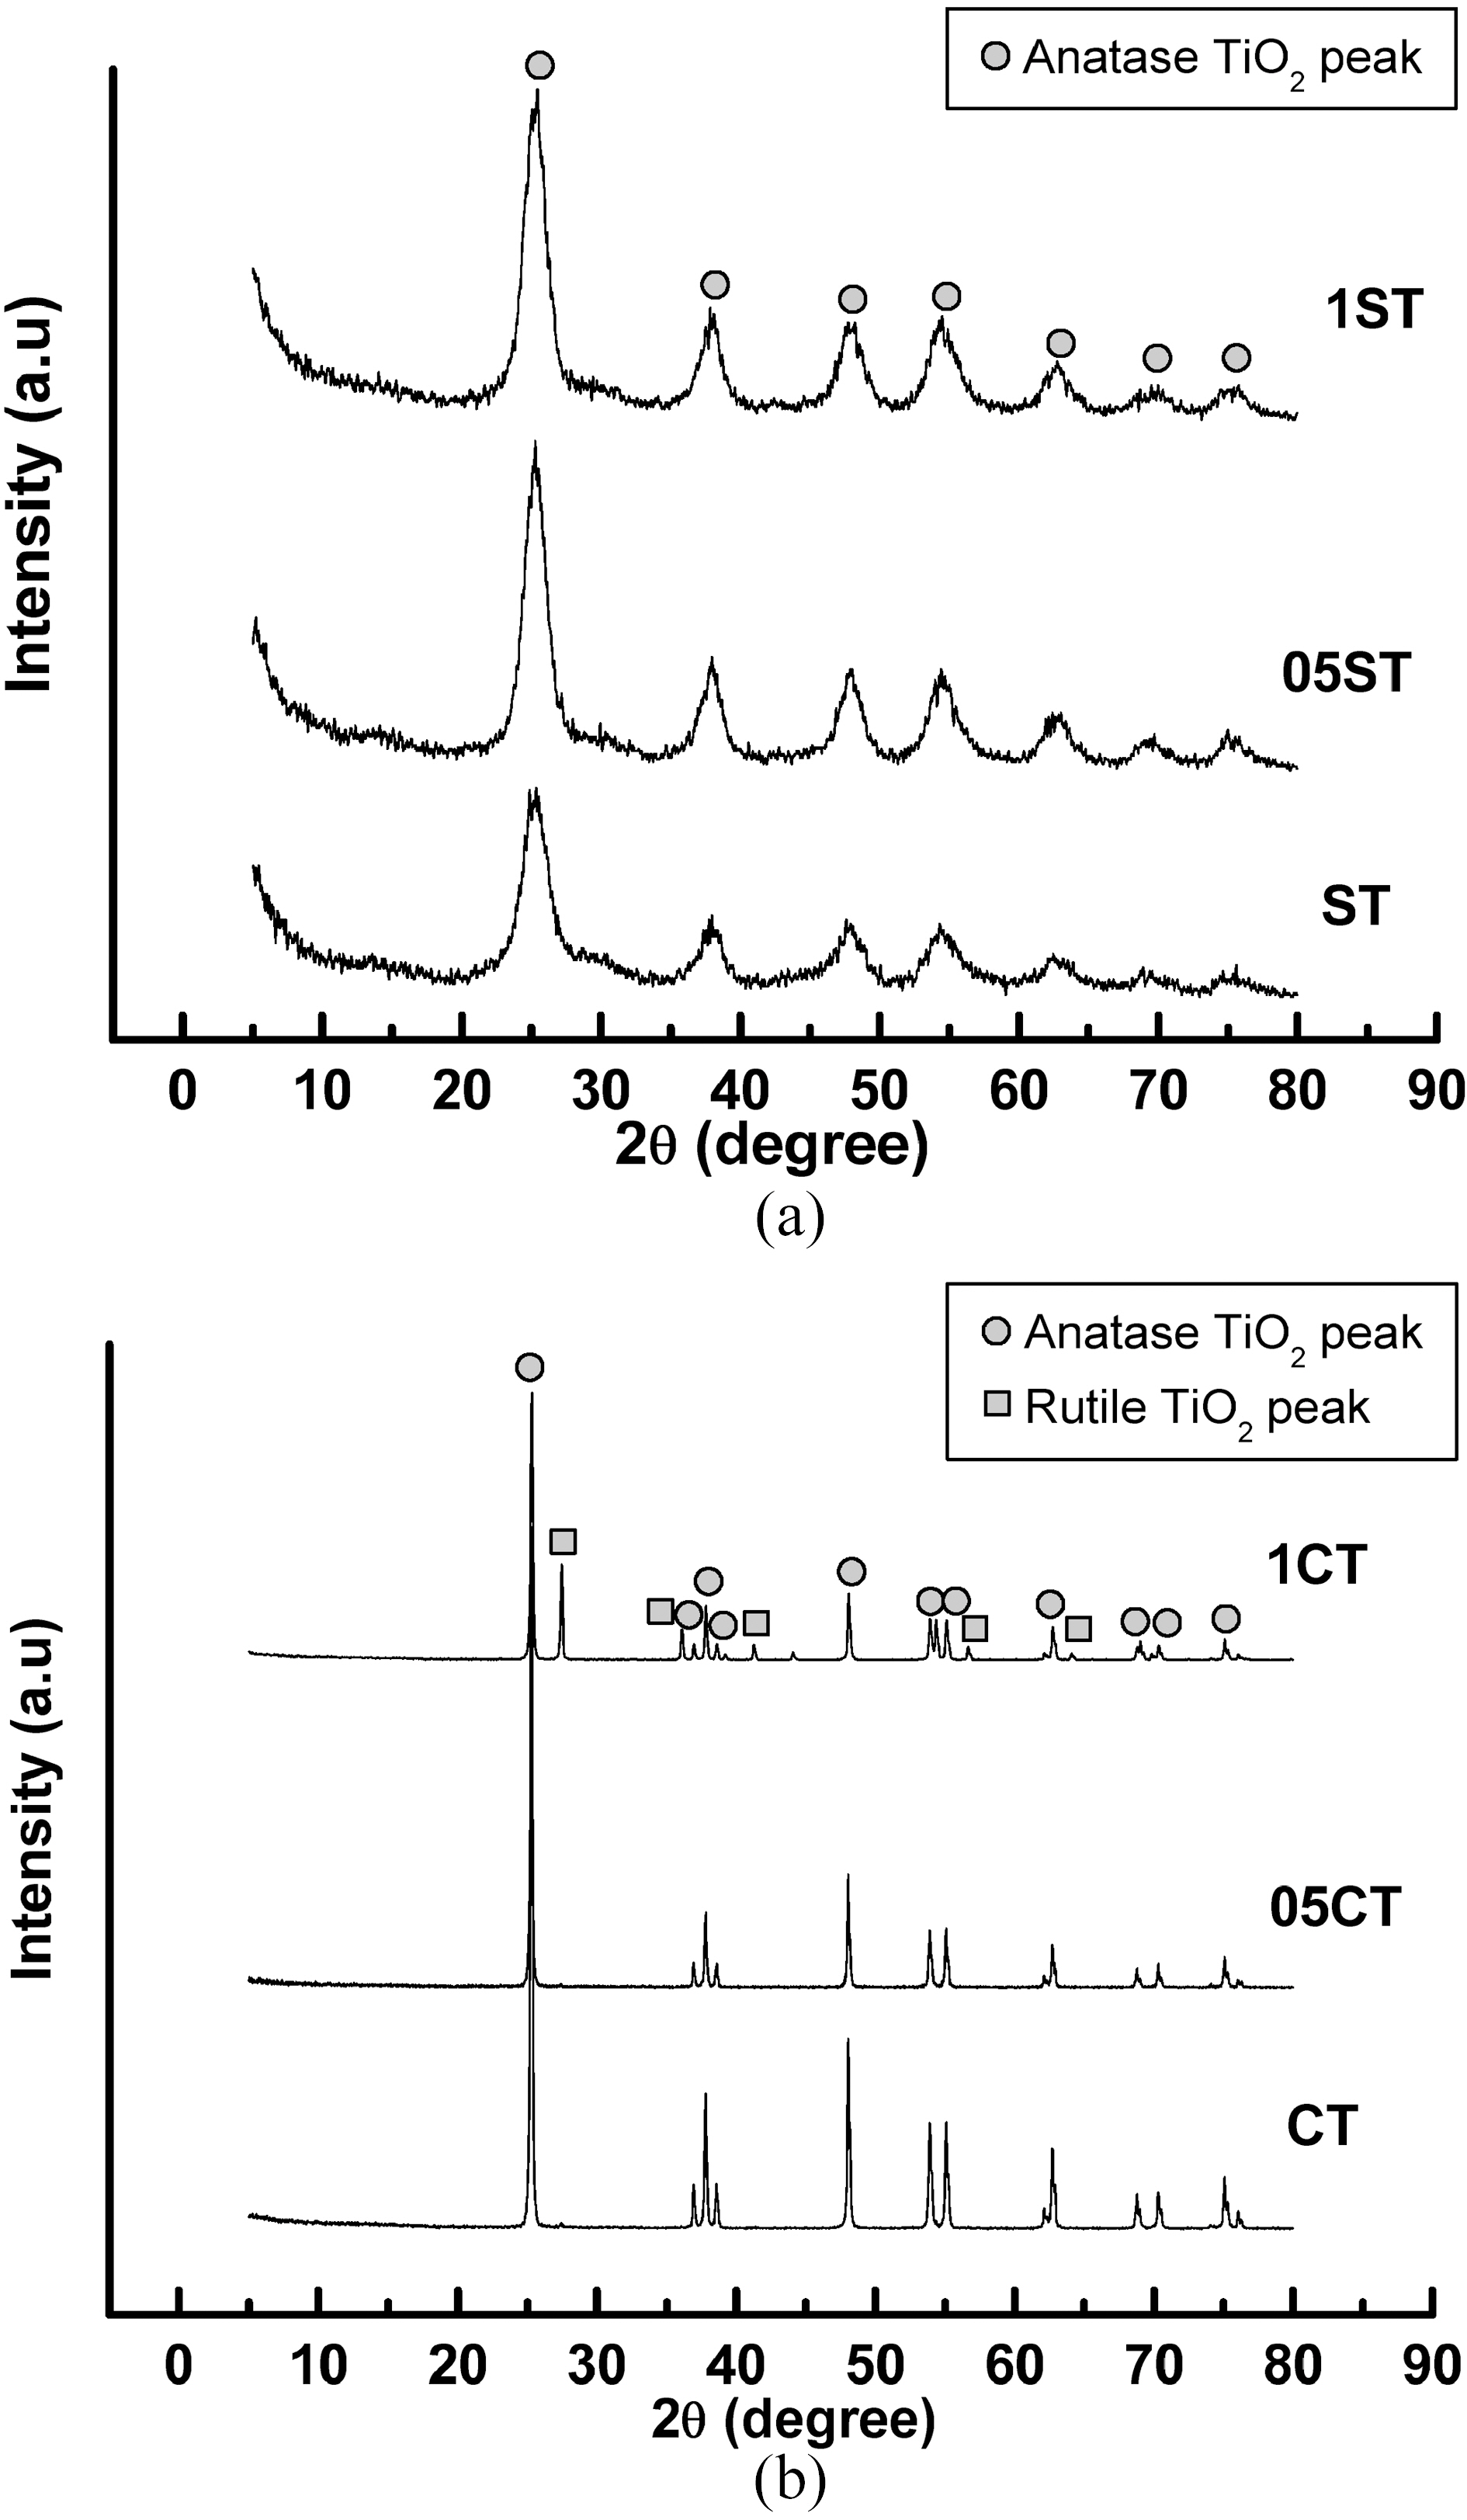 The XRD patterns of TiO2 powers synthesized by the sol-gel method (a) and commercial TiO2 (b).